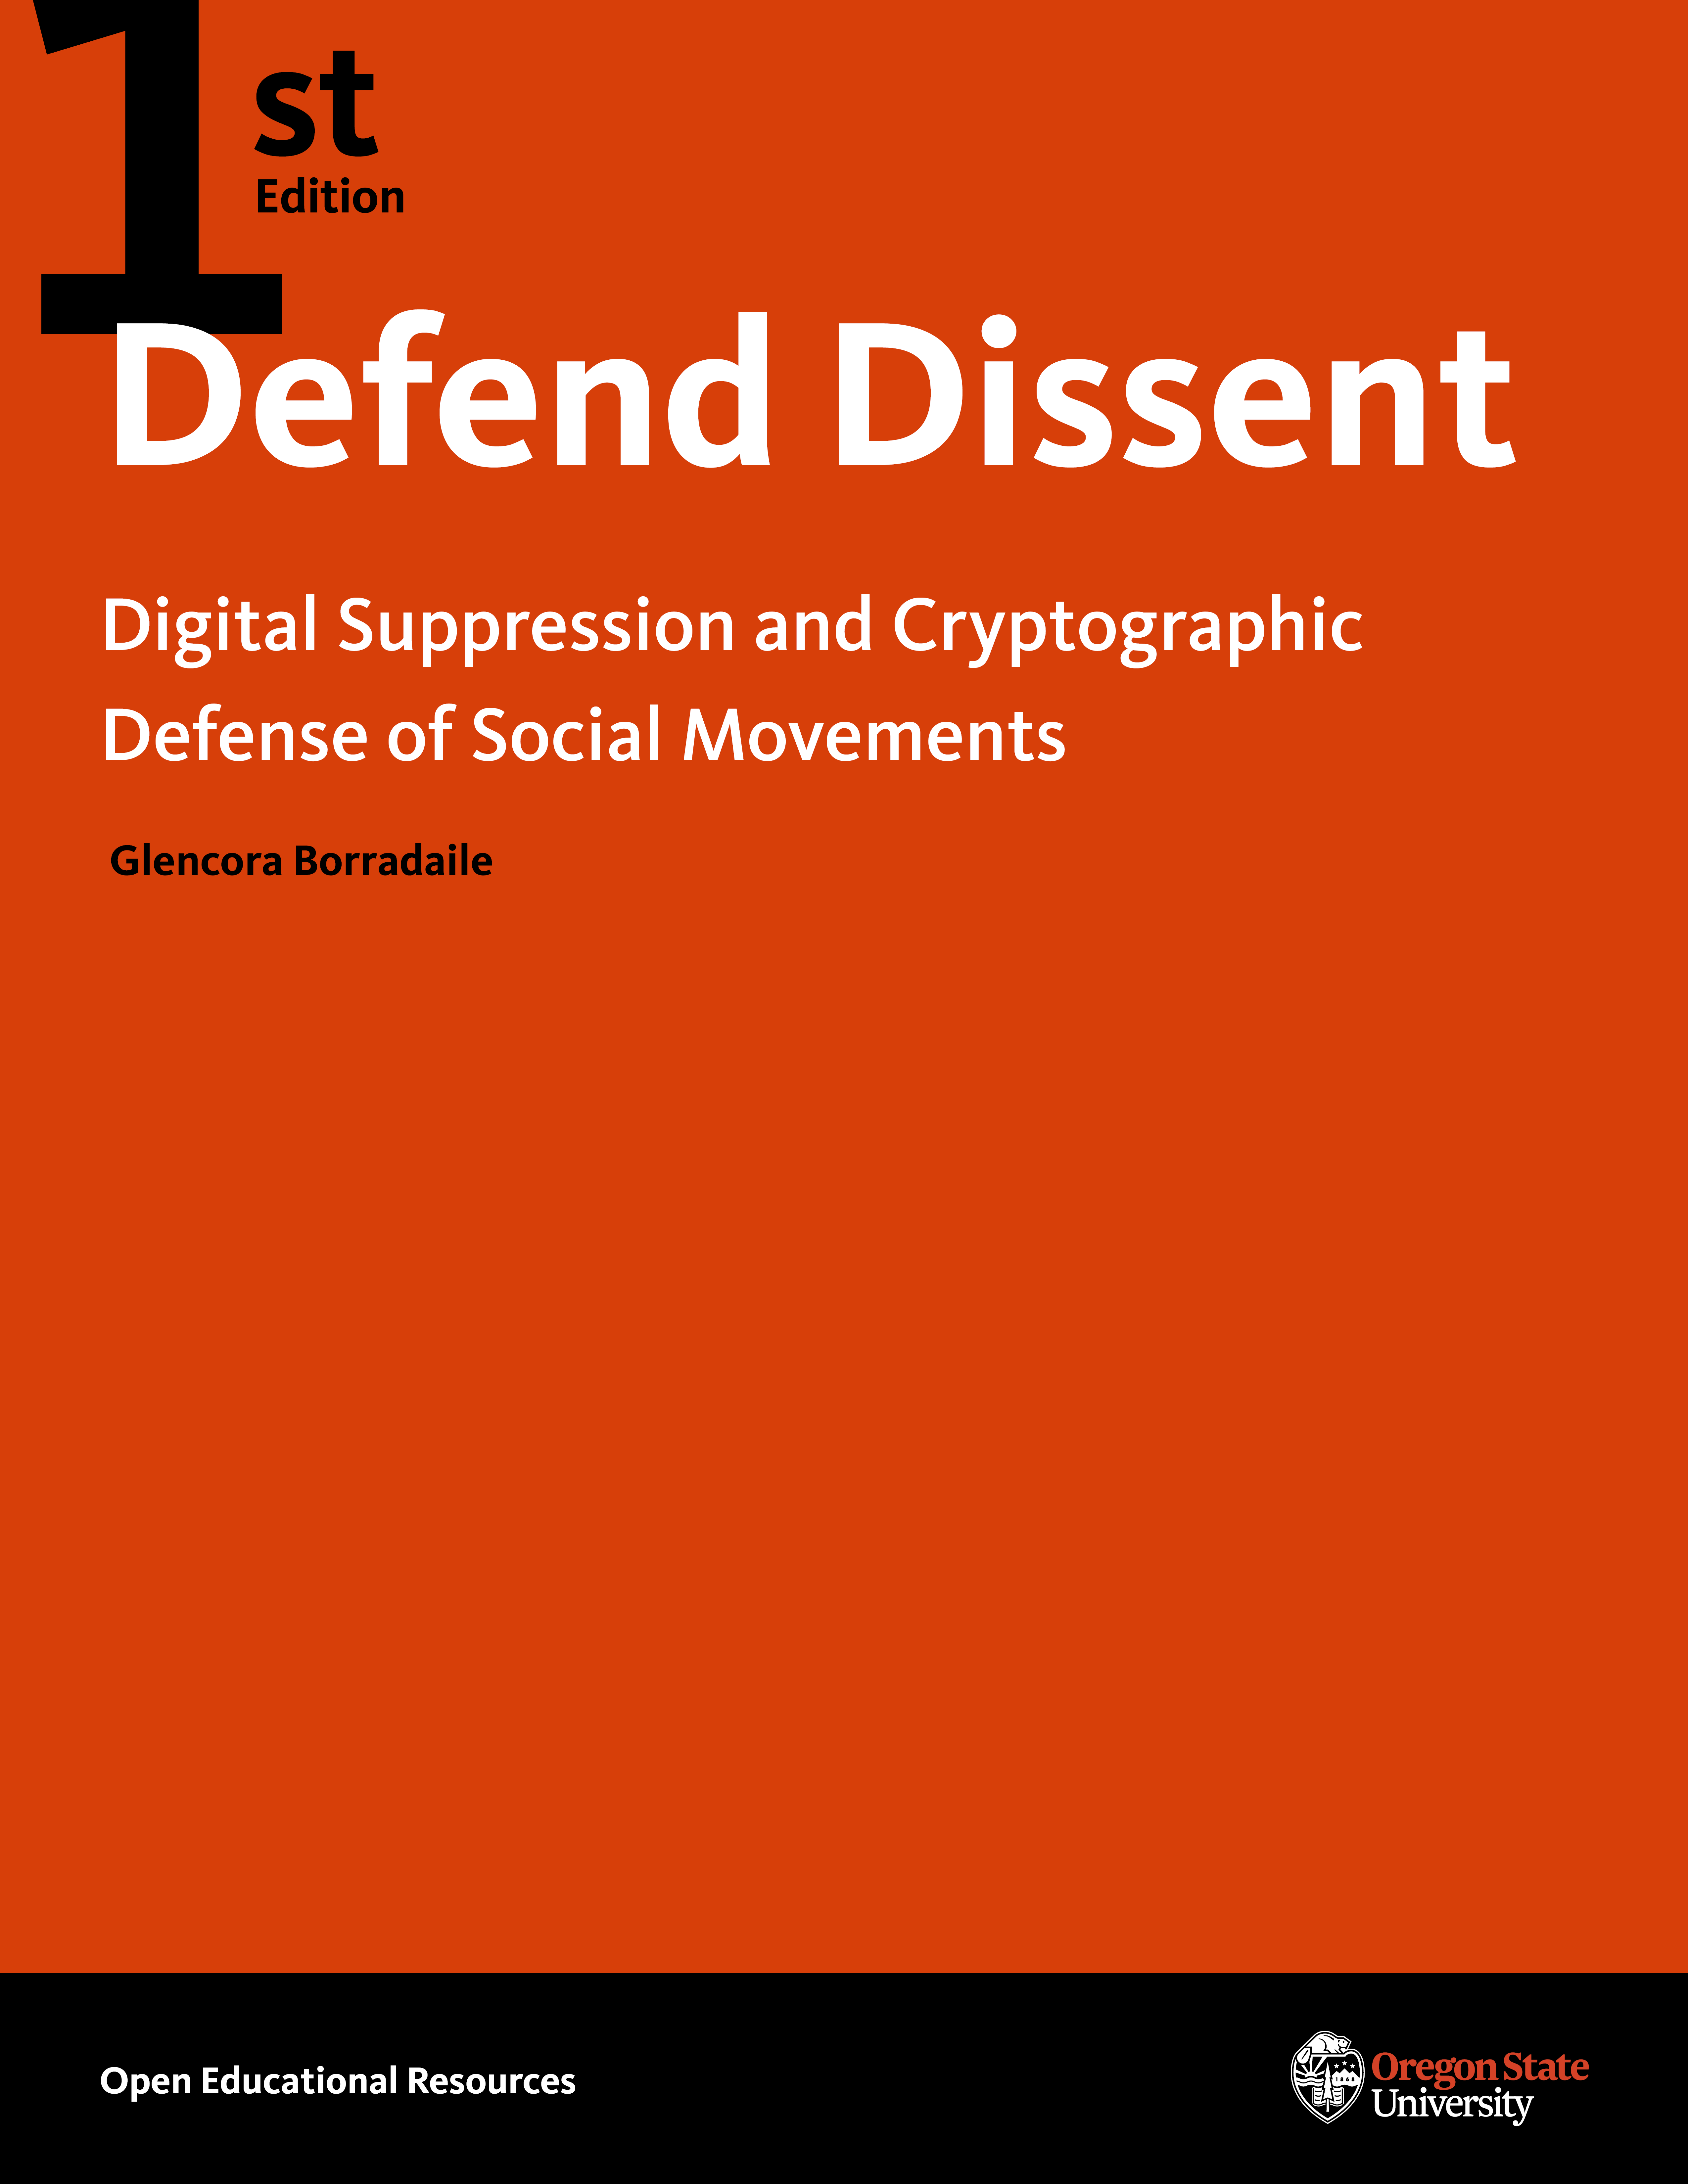 Defend Dissent: Digital Suppression and Cryptographic Defense of Social Movements